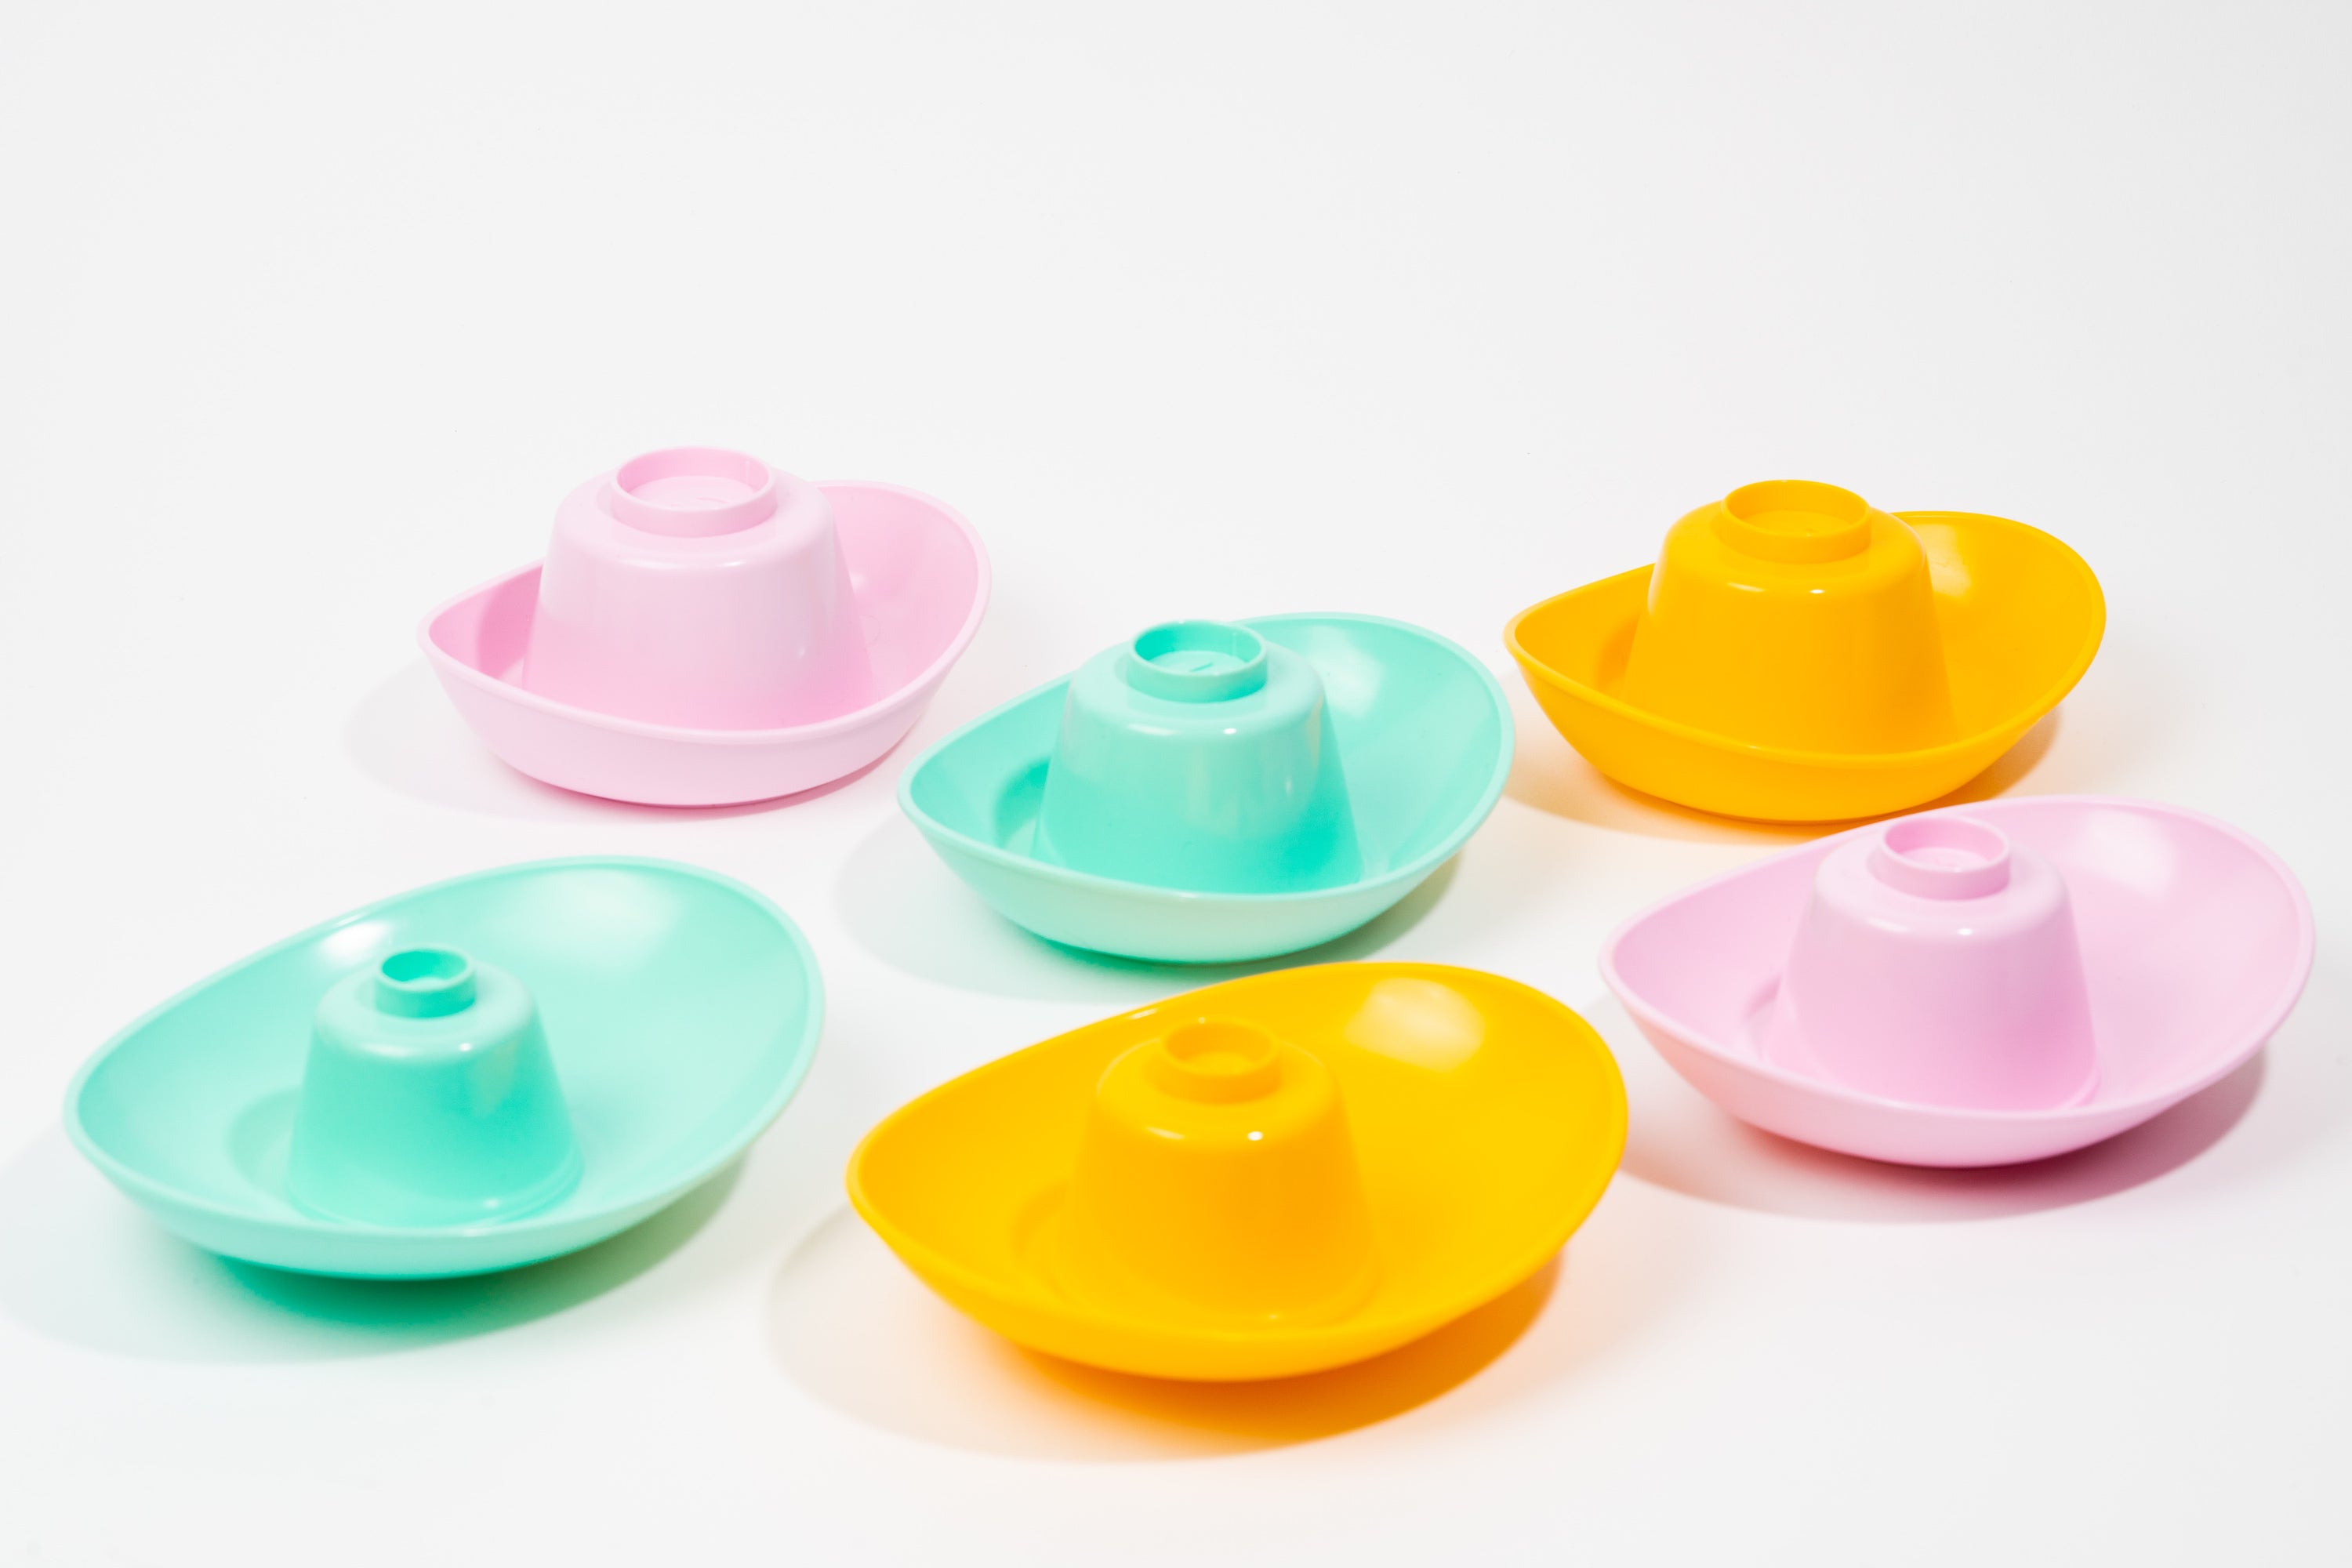 The Acrobat nesting cups - Made in France - Le Cadeau Simple